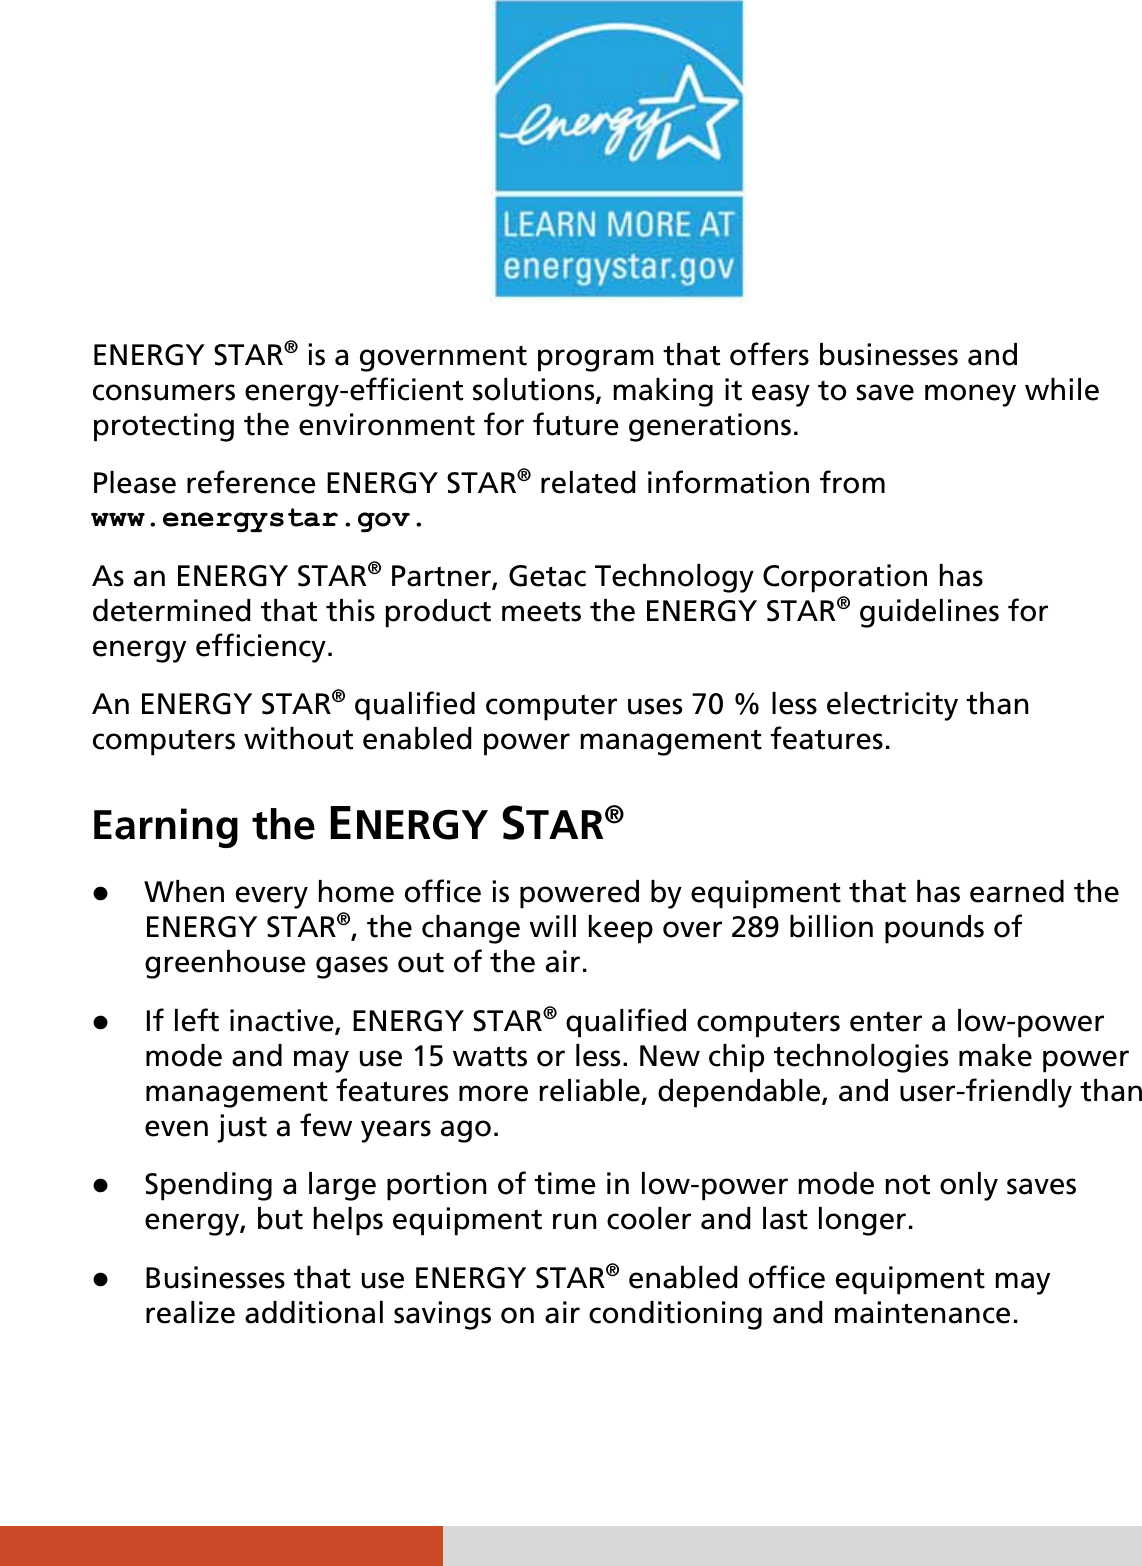     ENERGY STAR® is a government program that offers businesses and consumers energy-efficient solutions, making it easy to save money while protecting the environment for future generations. Please reference ENERGY STAR® related information from www.energystar.gov. As an ENERGY STAR® Partner, Getac Technology Corporation has determined that this product meets the ENERGY STAR® guidelines for energy efficiency. An ENERGY STAR® qualified computer uses 70 % less electricity than computers without enabled power management features. Earning the ENERGY STAR® z When every home office is powered by equipment that has earned the ENERGY STAR®, the change will keep over 289 billion pounds of greenhouse gases out of the air. z If left inactive, ENERGY STAR® qualified computers enter a low-power mode and may use 15 watts or less. New chip technologies make power management features more reliable, dependable, and user-friendly than even just a few years ago. z Spending a large portion of time in low-power mode not only saves energy, but helps equipment run cooler and last longer. z Businesses that use ENERGY STAR® enabled office equipment may realize additional savings on air conditioning and maintenance. 